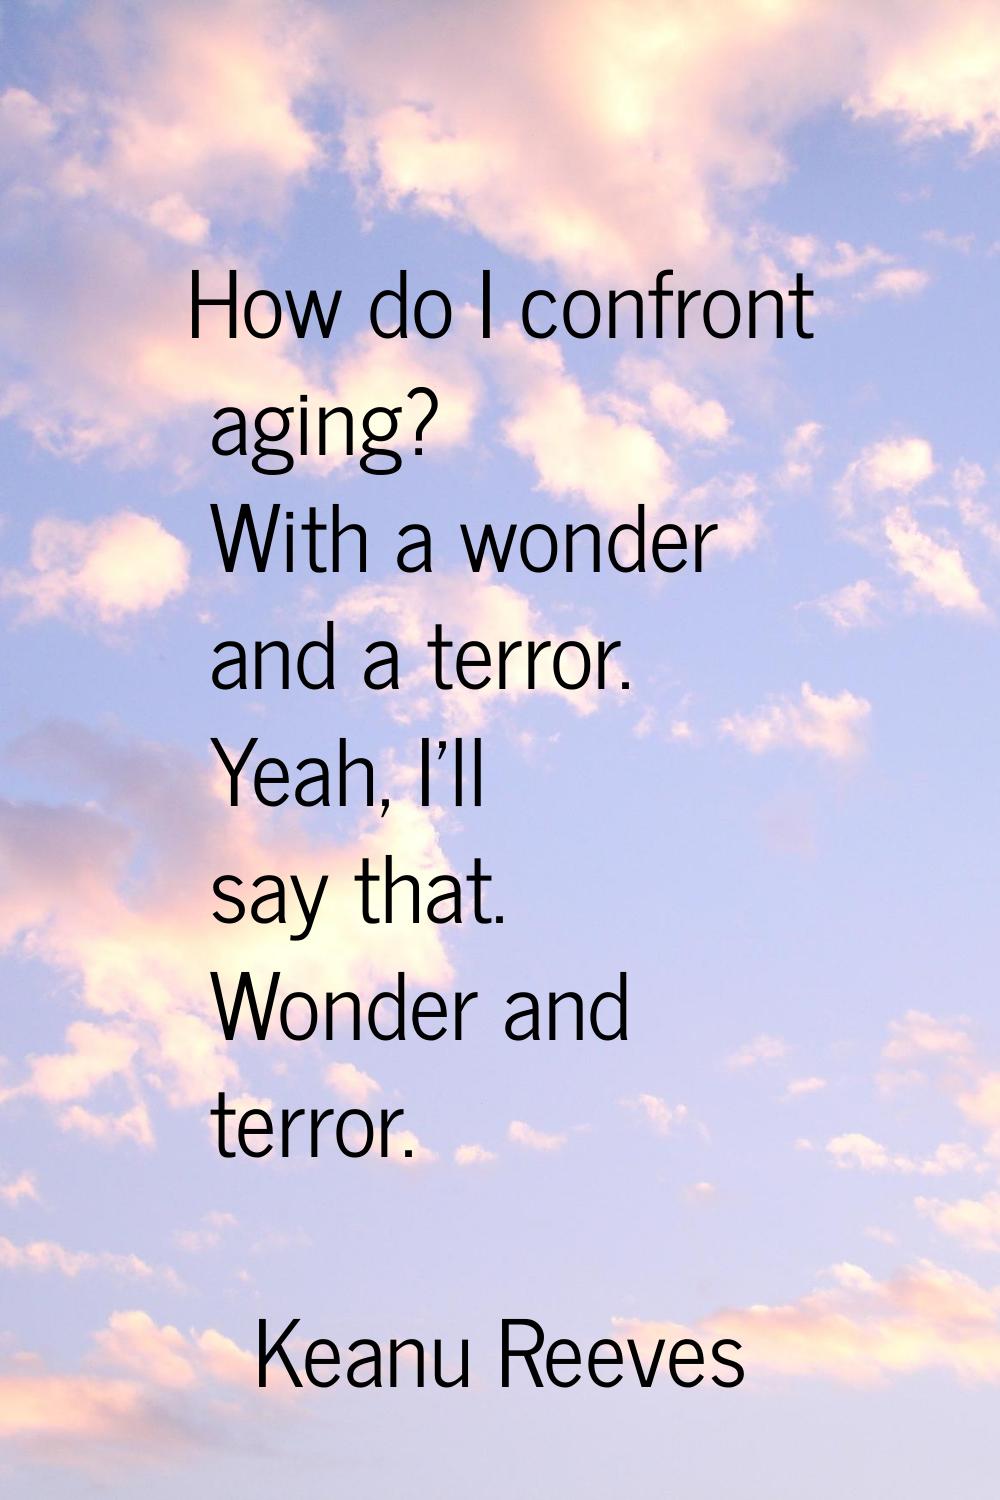 How do I confront aging? With a wonder and a terror. Yeah, I'll say that. Wonder and terror.